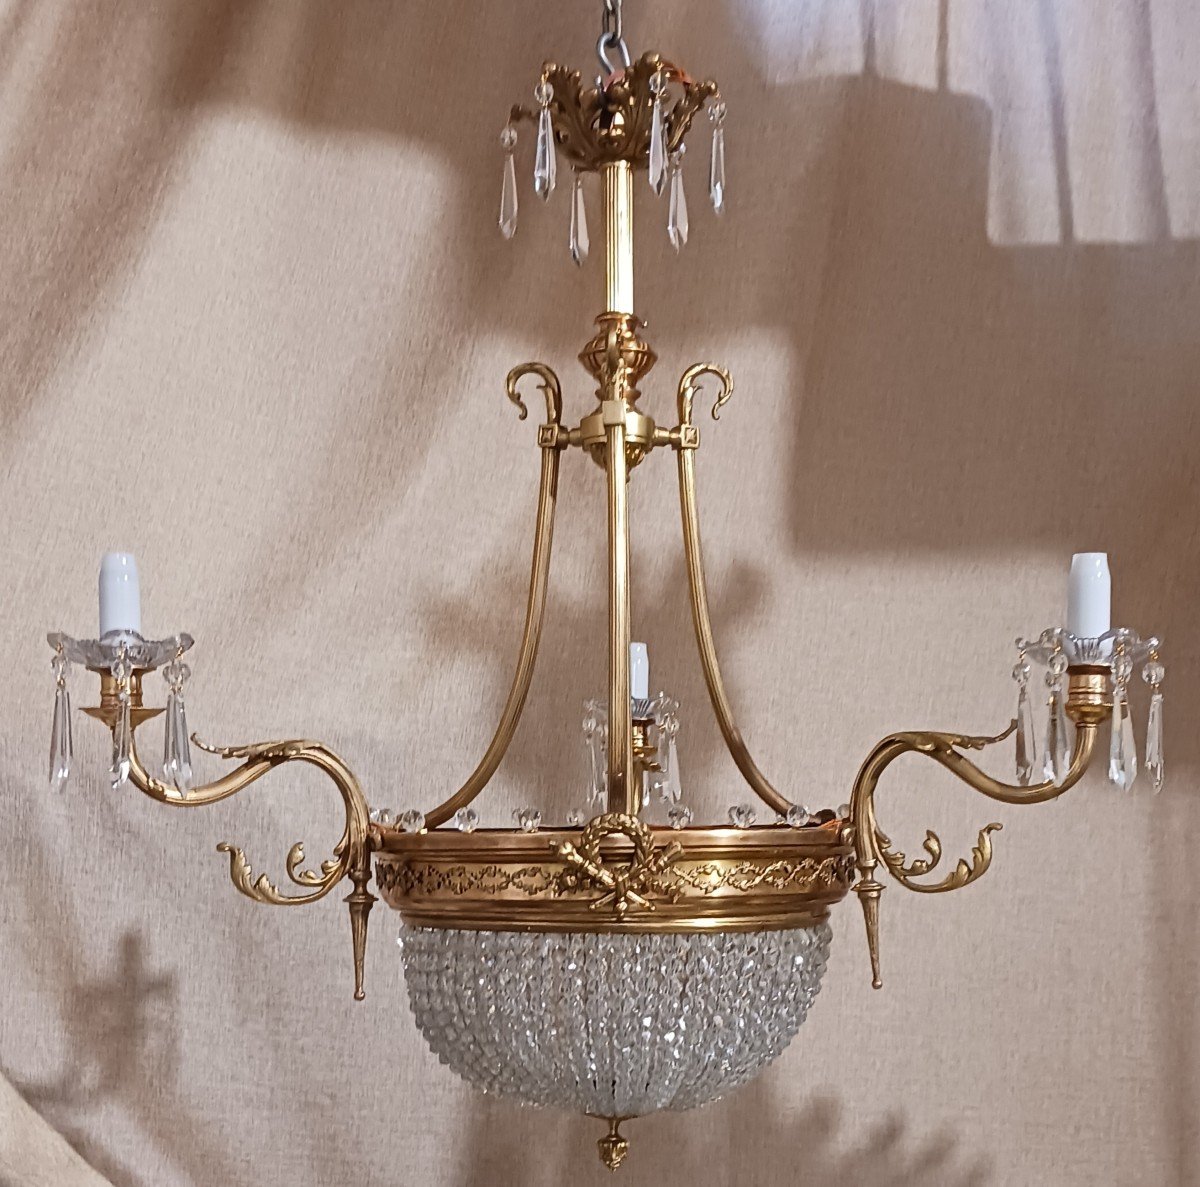 Antique Restored Crystal And Bronze Empire Style Chandelier